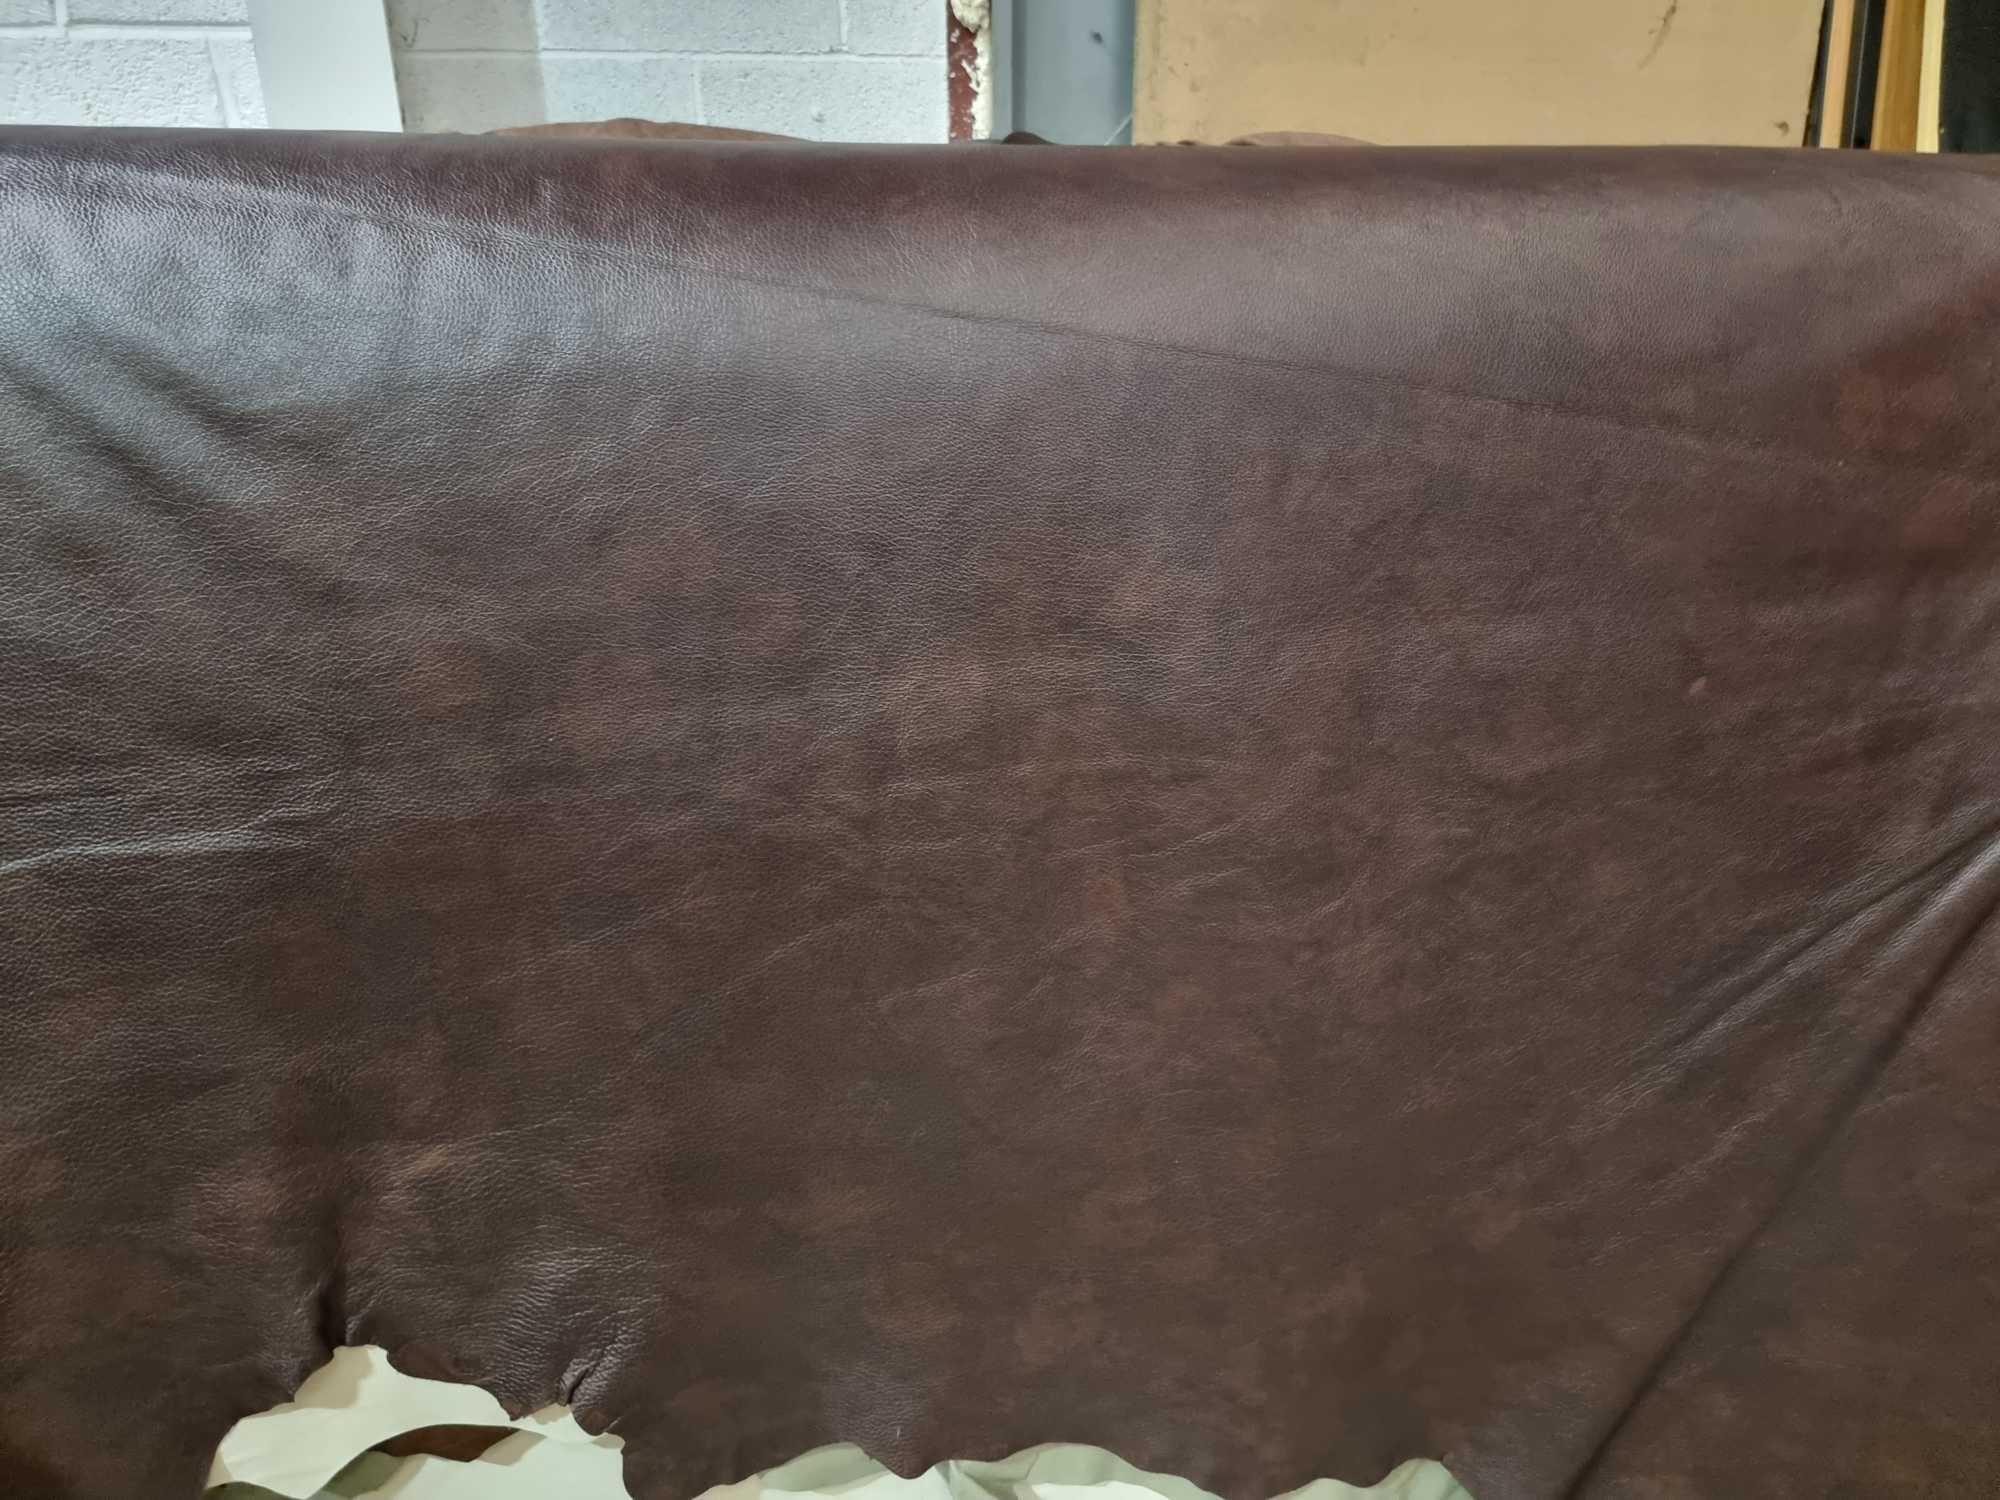 Chocolate Leather Hide approximately 3 6M2 2 x 1 8cm ( Hide No,189)